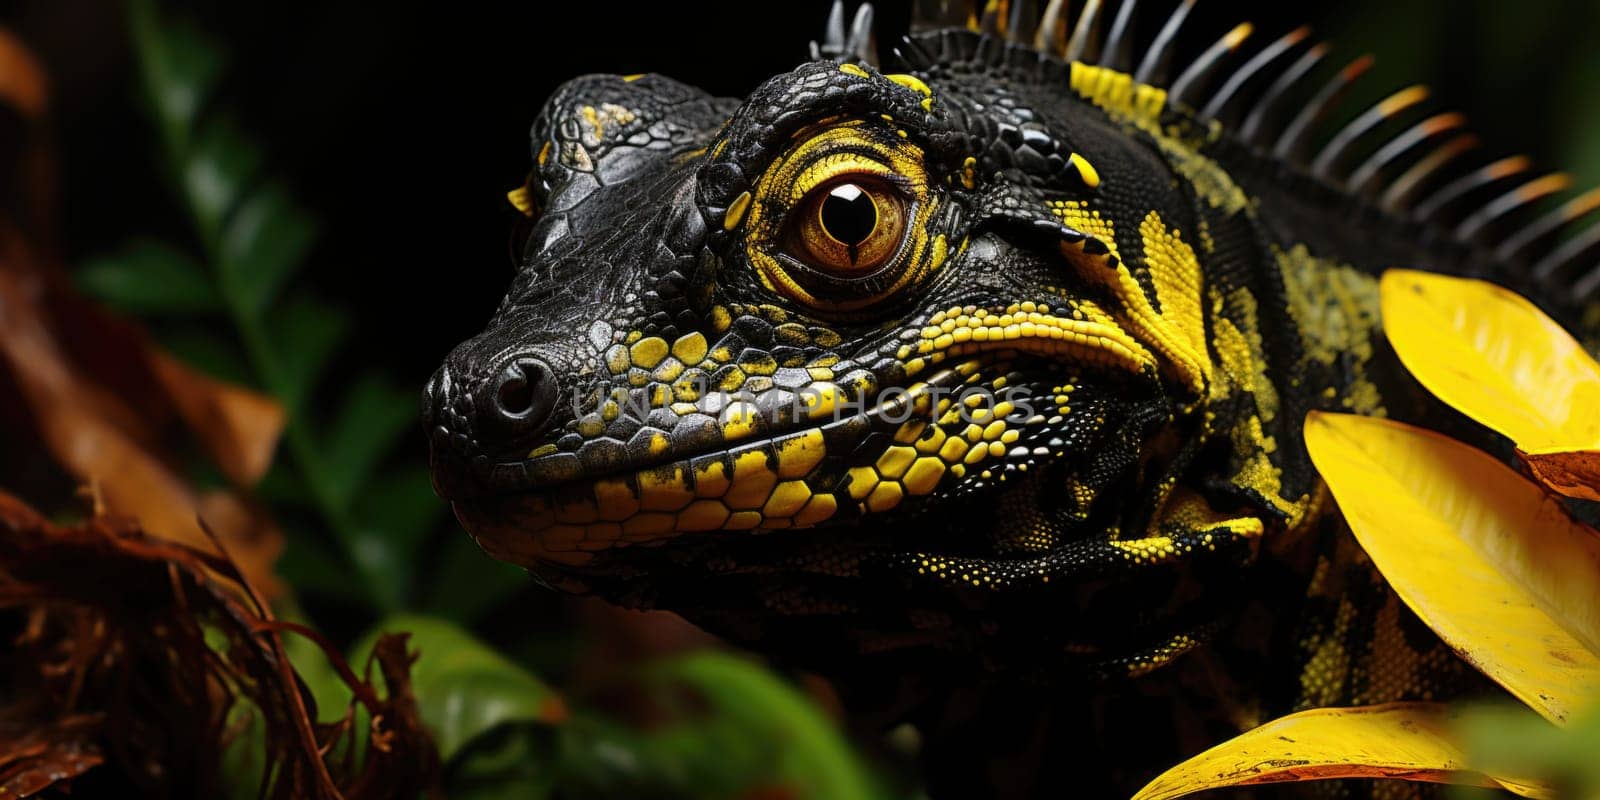 A yellow and black lizard-like reptile, AI by starush